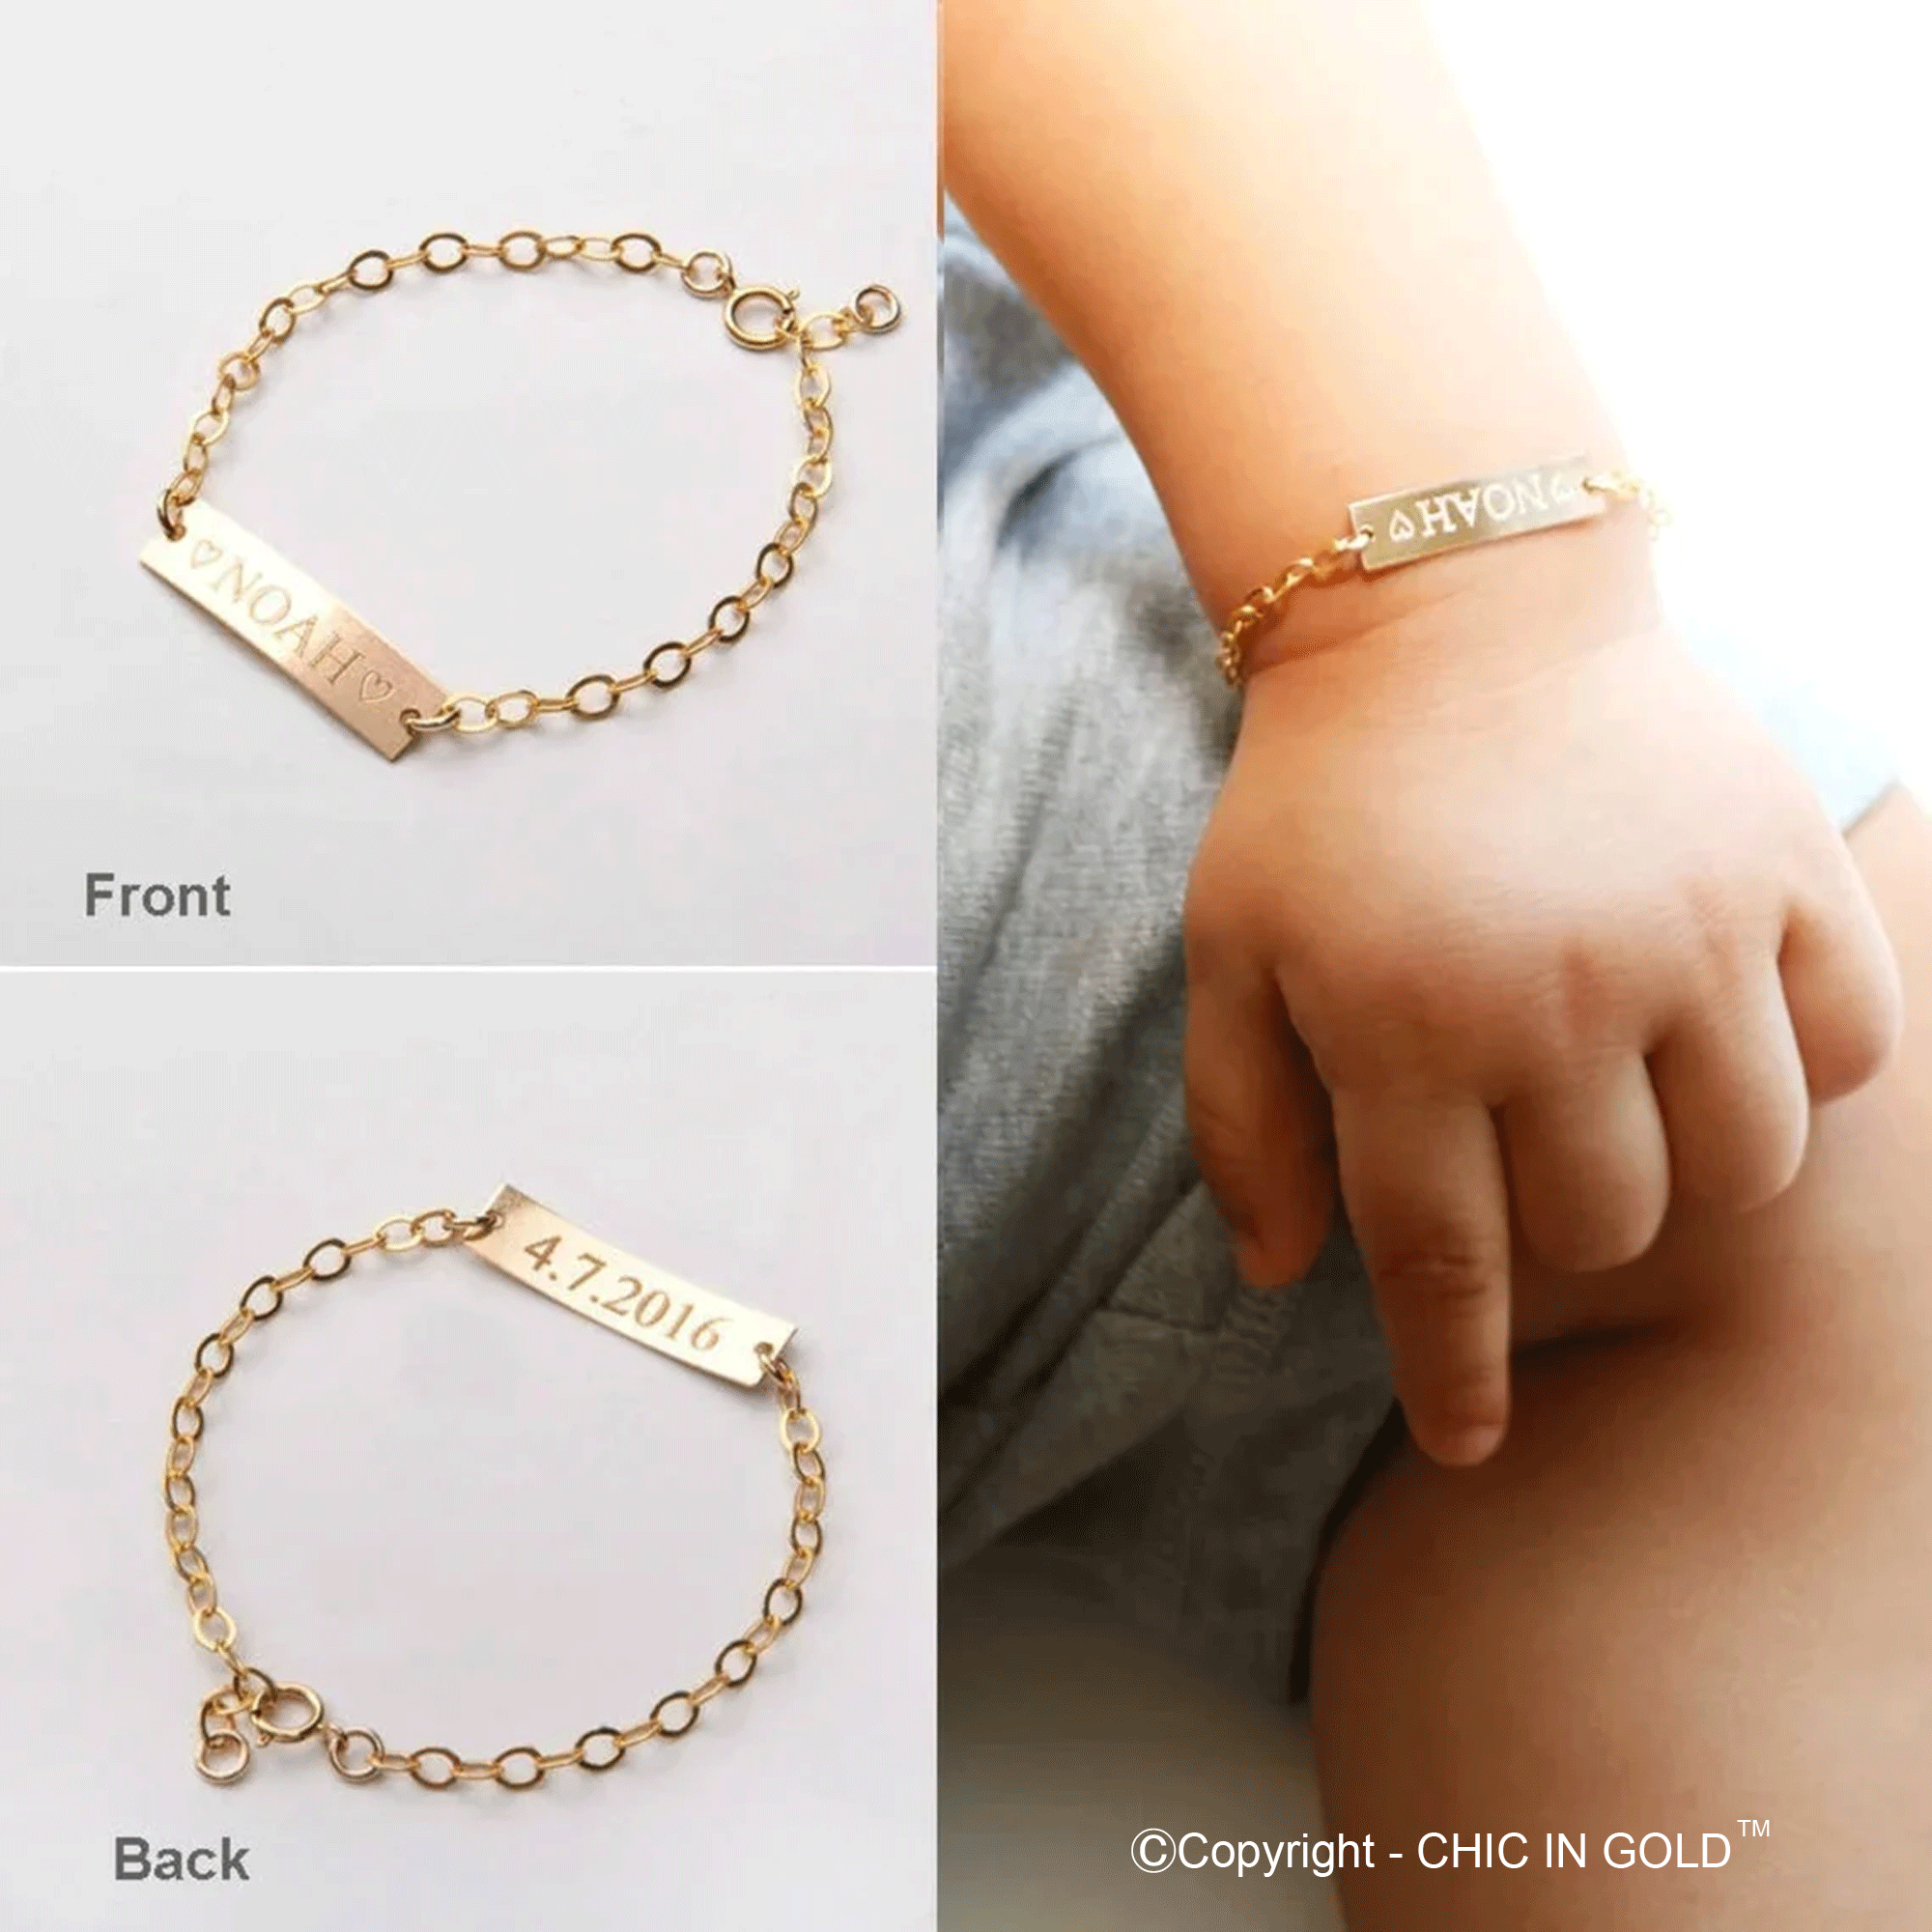 Gold Coin Ankle Bangles Bracelet For Girls WANDO Muslim Arab Money Jewelry,  Perfect Birthday Gift From Kimlizzie, $10.38 | DHgate.Com